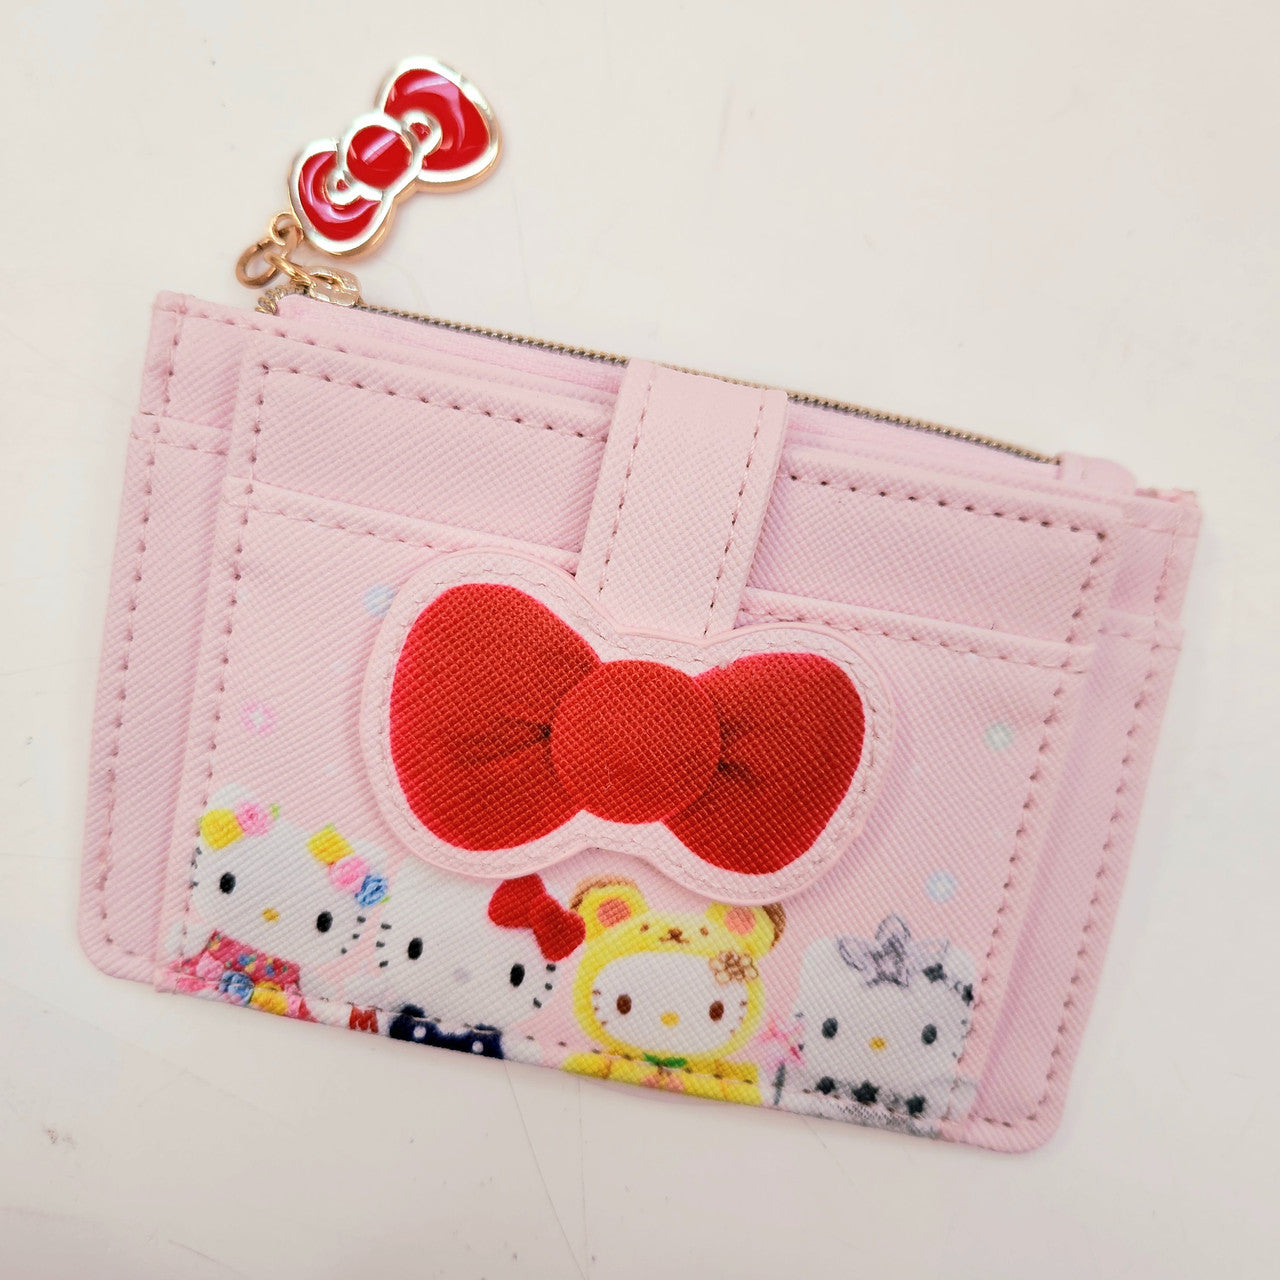 Hello Kitty 50th Anniversay OVER THE YEARS Card Case